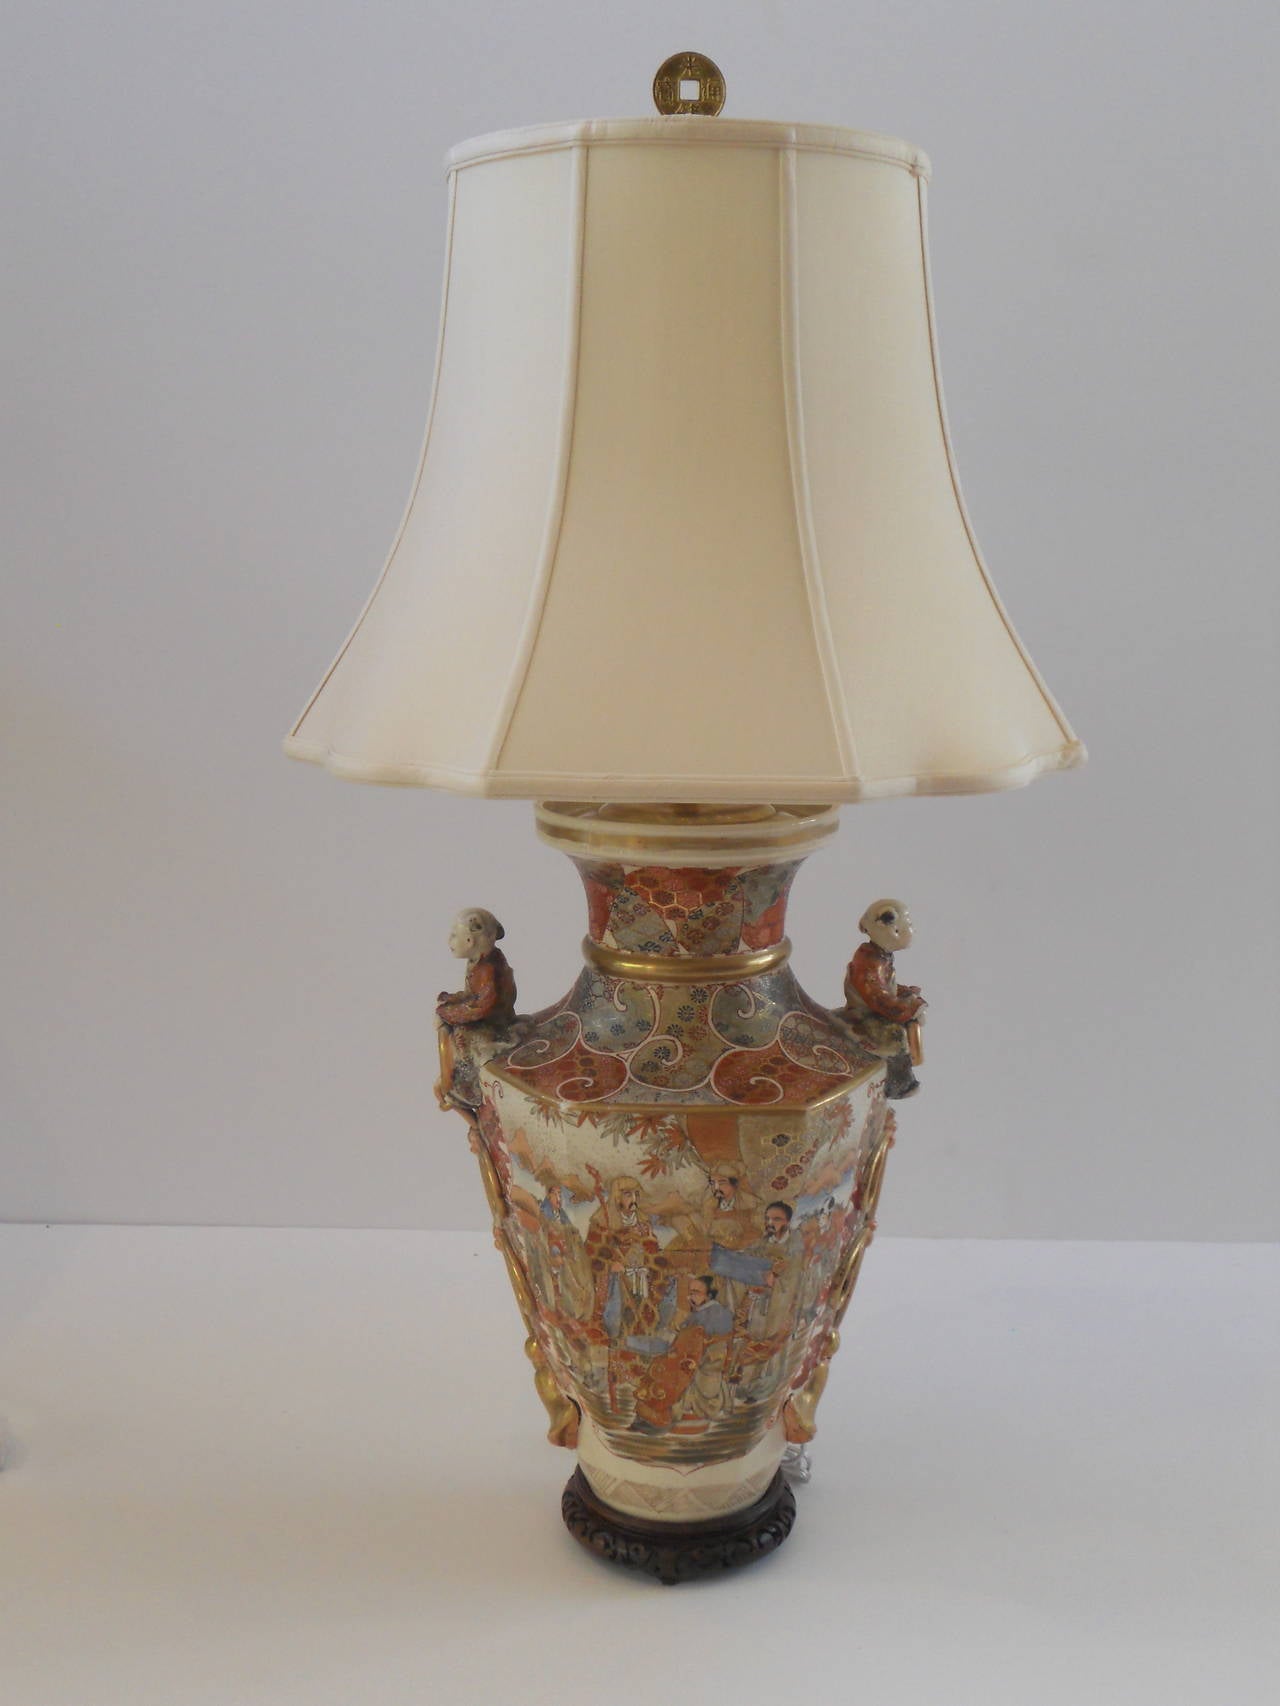 Large Satsuma vase as a lamp with a pair of figures resting atop the urn form vase holding gold interlocked tassels. The piece is hand-painted with highly detailed decoration and figures in soft shades of orange, pale blue, gold and deep, rich red.